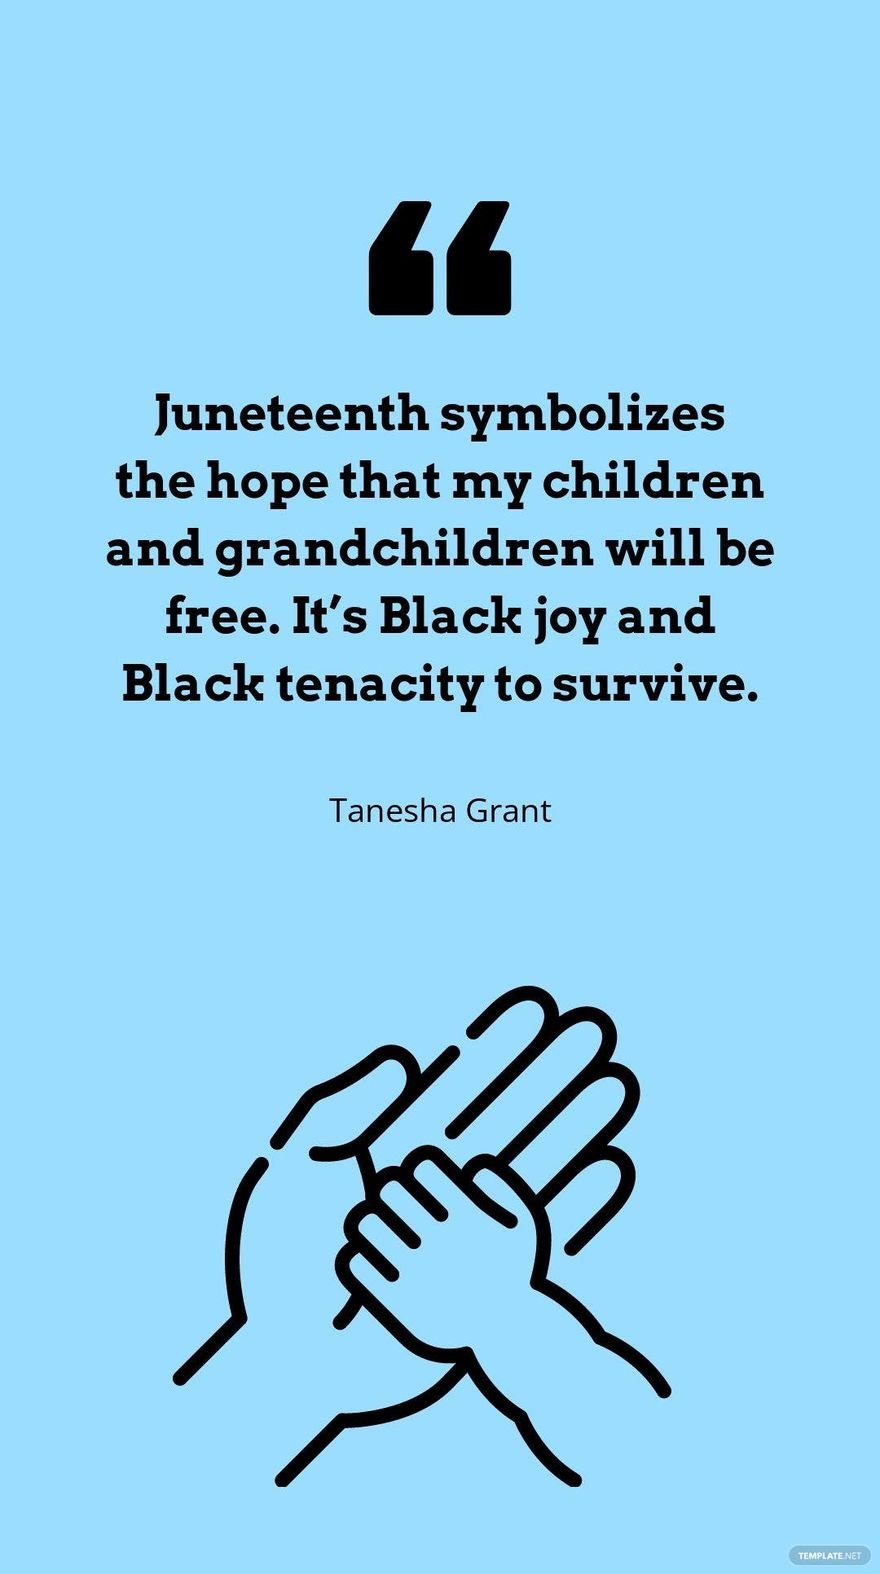 Tanesha Grant - Juneteenth symbolizes the hope that my children and grandchildren will be free. It’s Black joy and Black tenacity to survive. in JPG